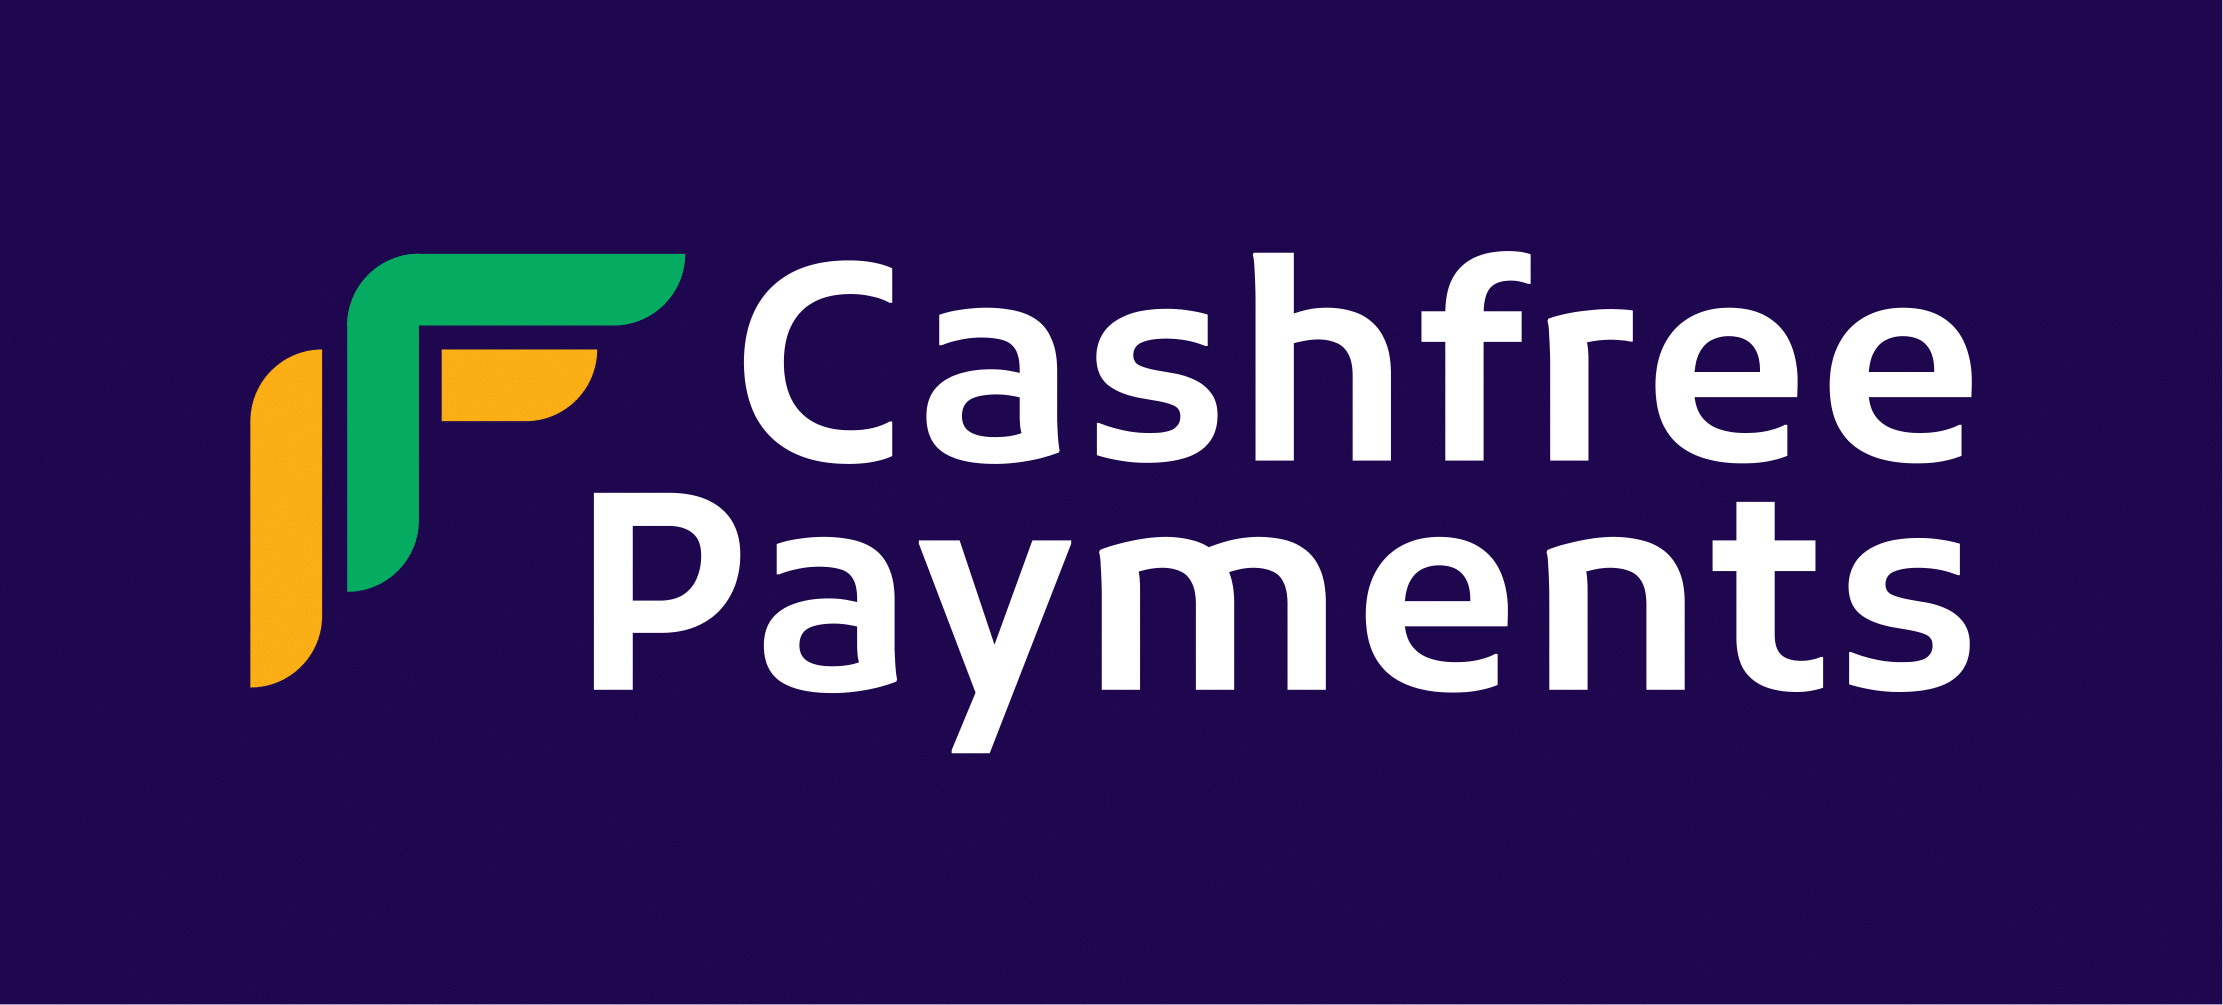 Cash free payments